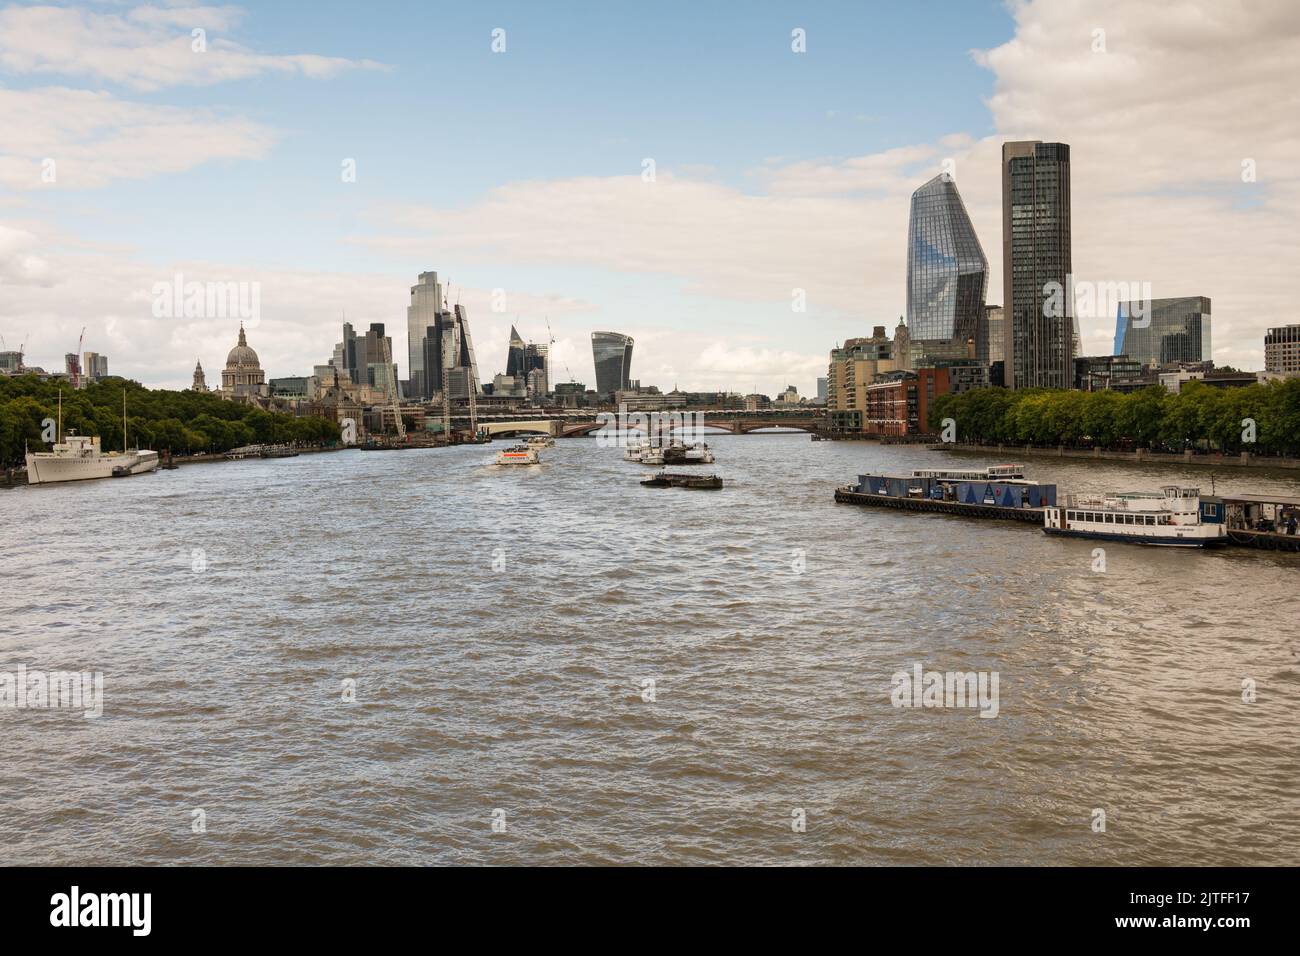 A view of the River Thames and the skyscrapers of the  City of London skyline from Waterloo Bridge, London, England, UK Stock Photo